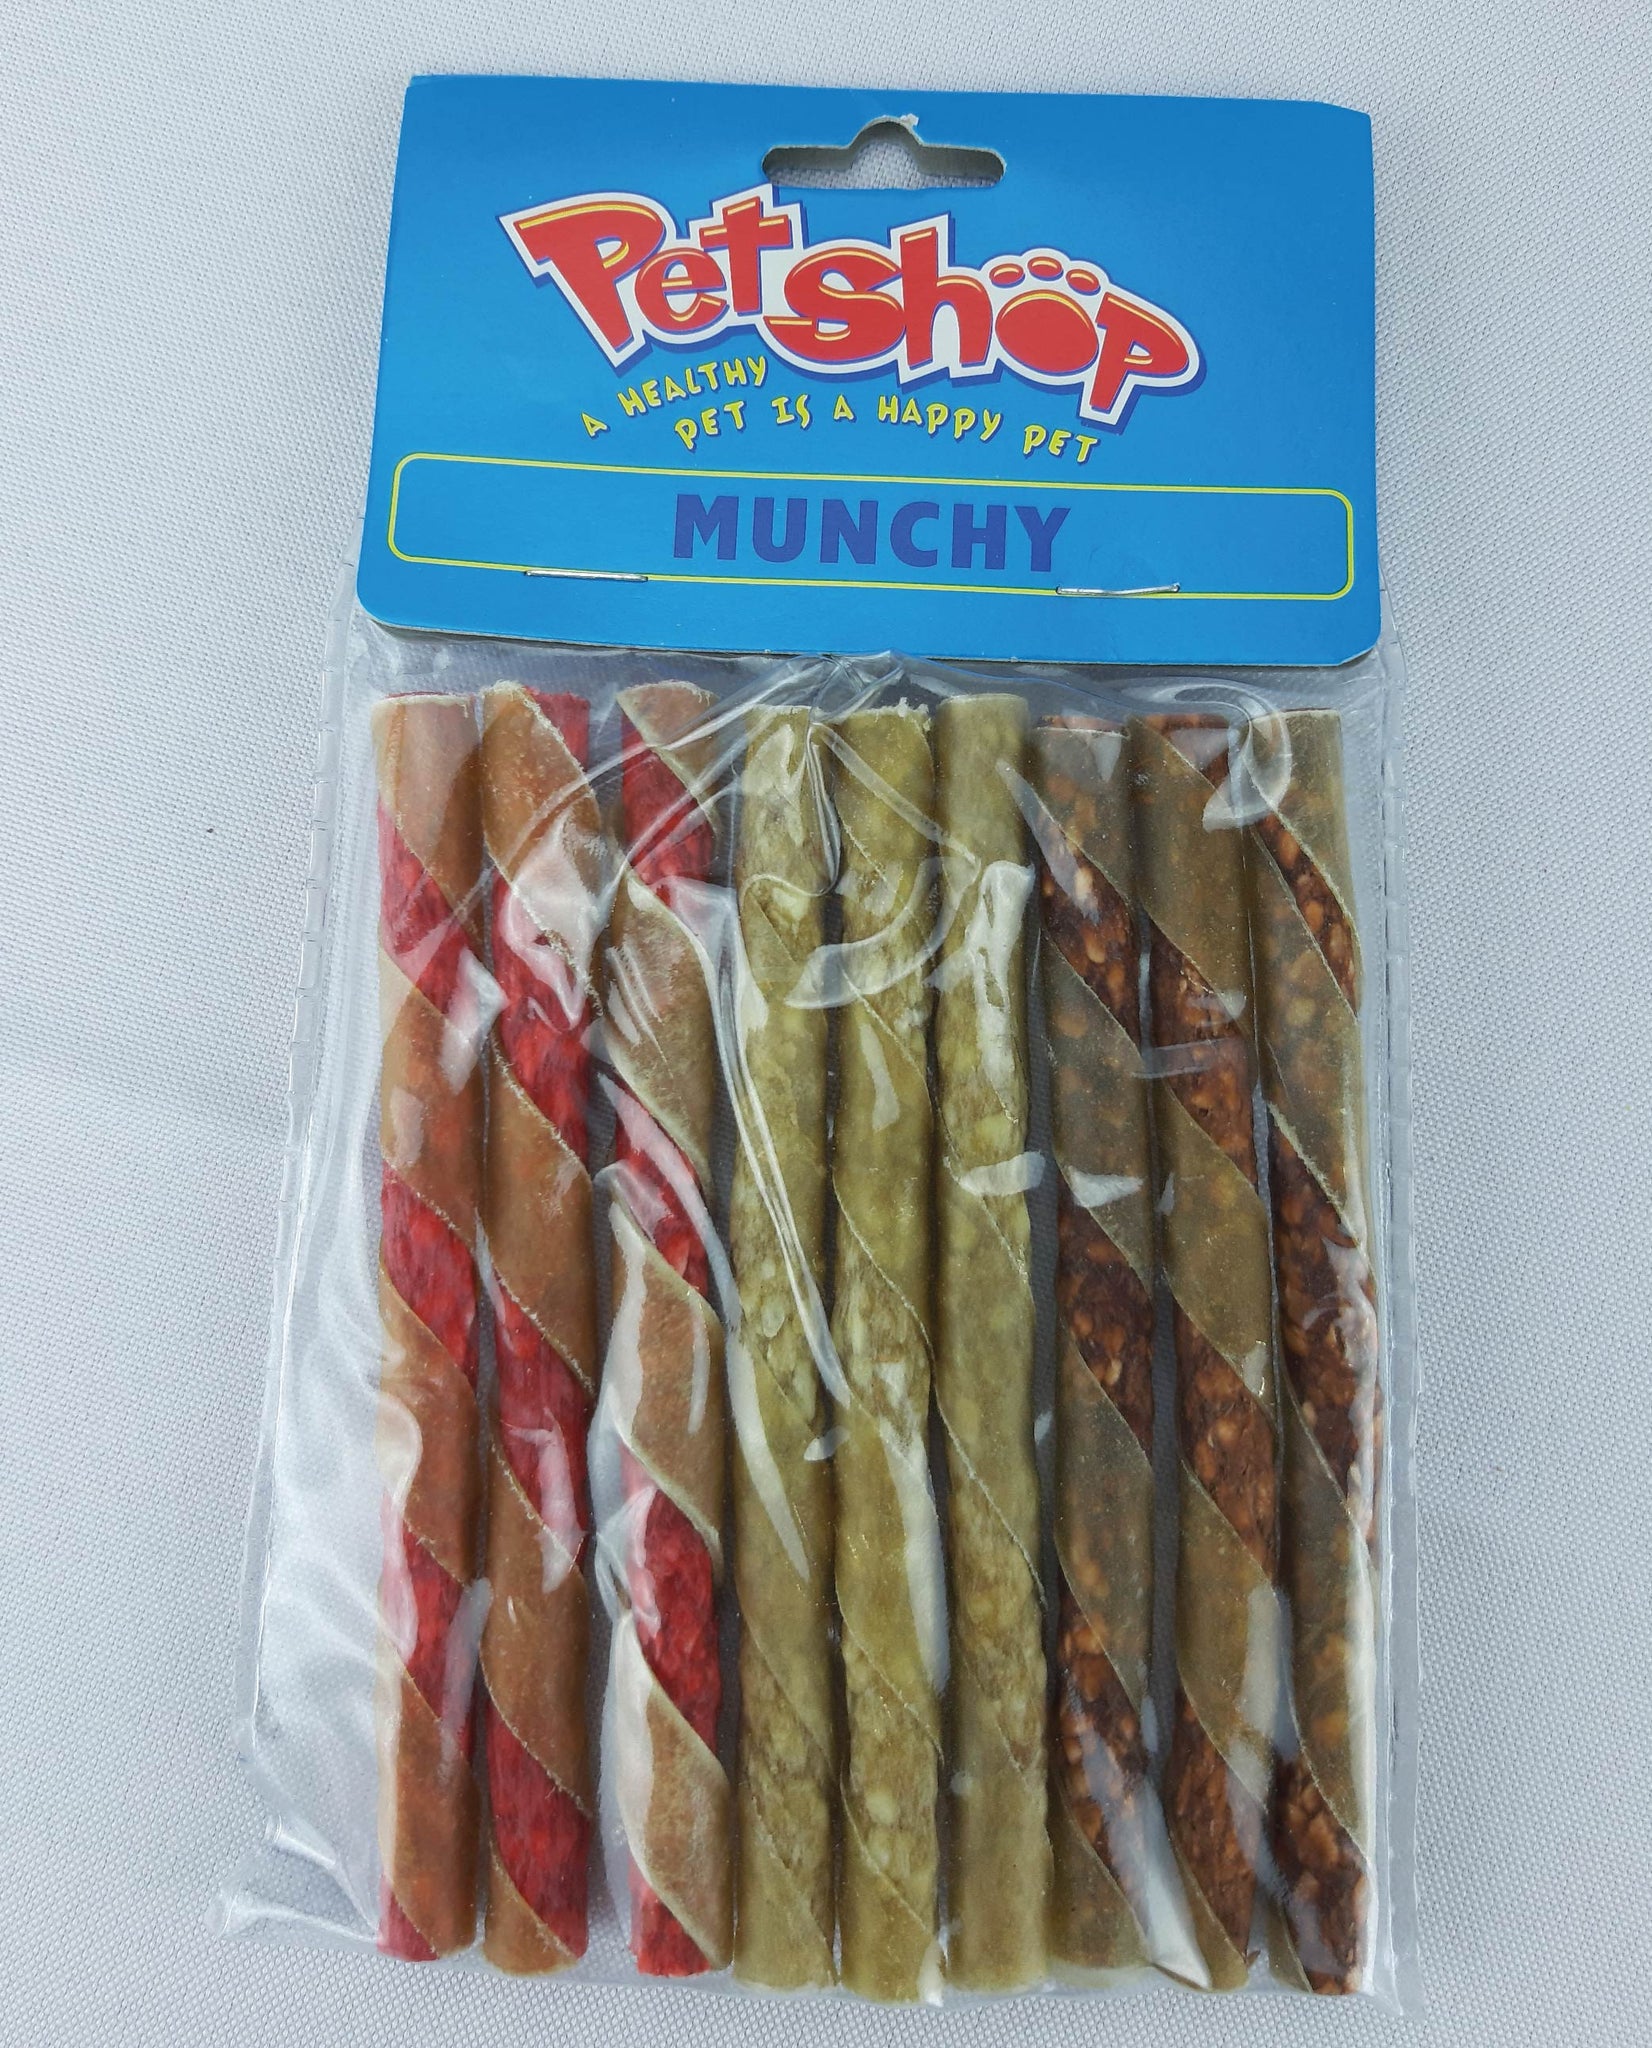 MSCshoping 10117548 Dog Chew Munchy Stick Petshop (Made to order )